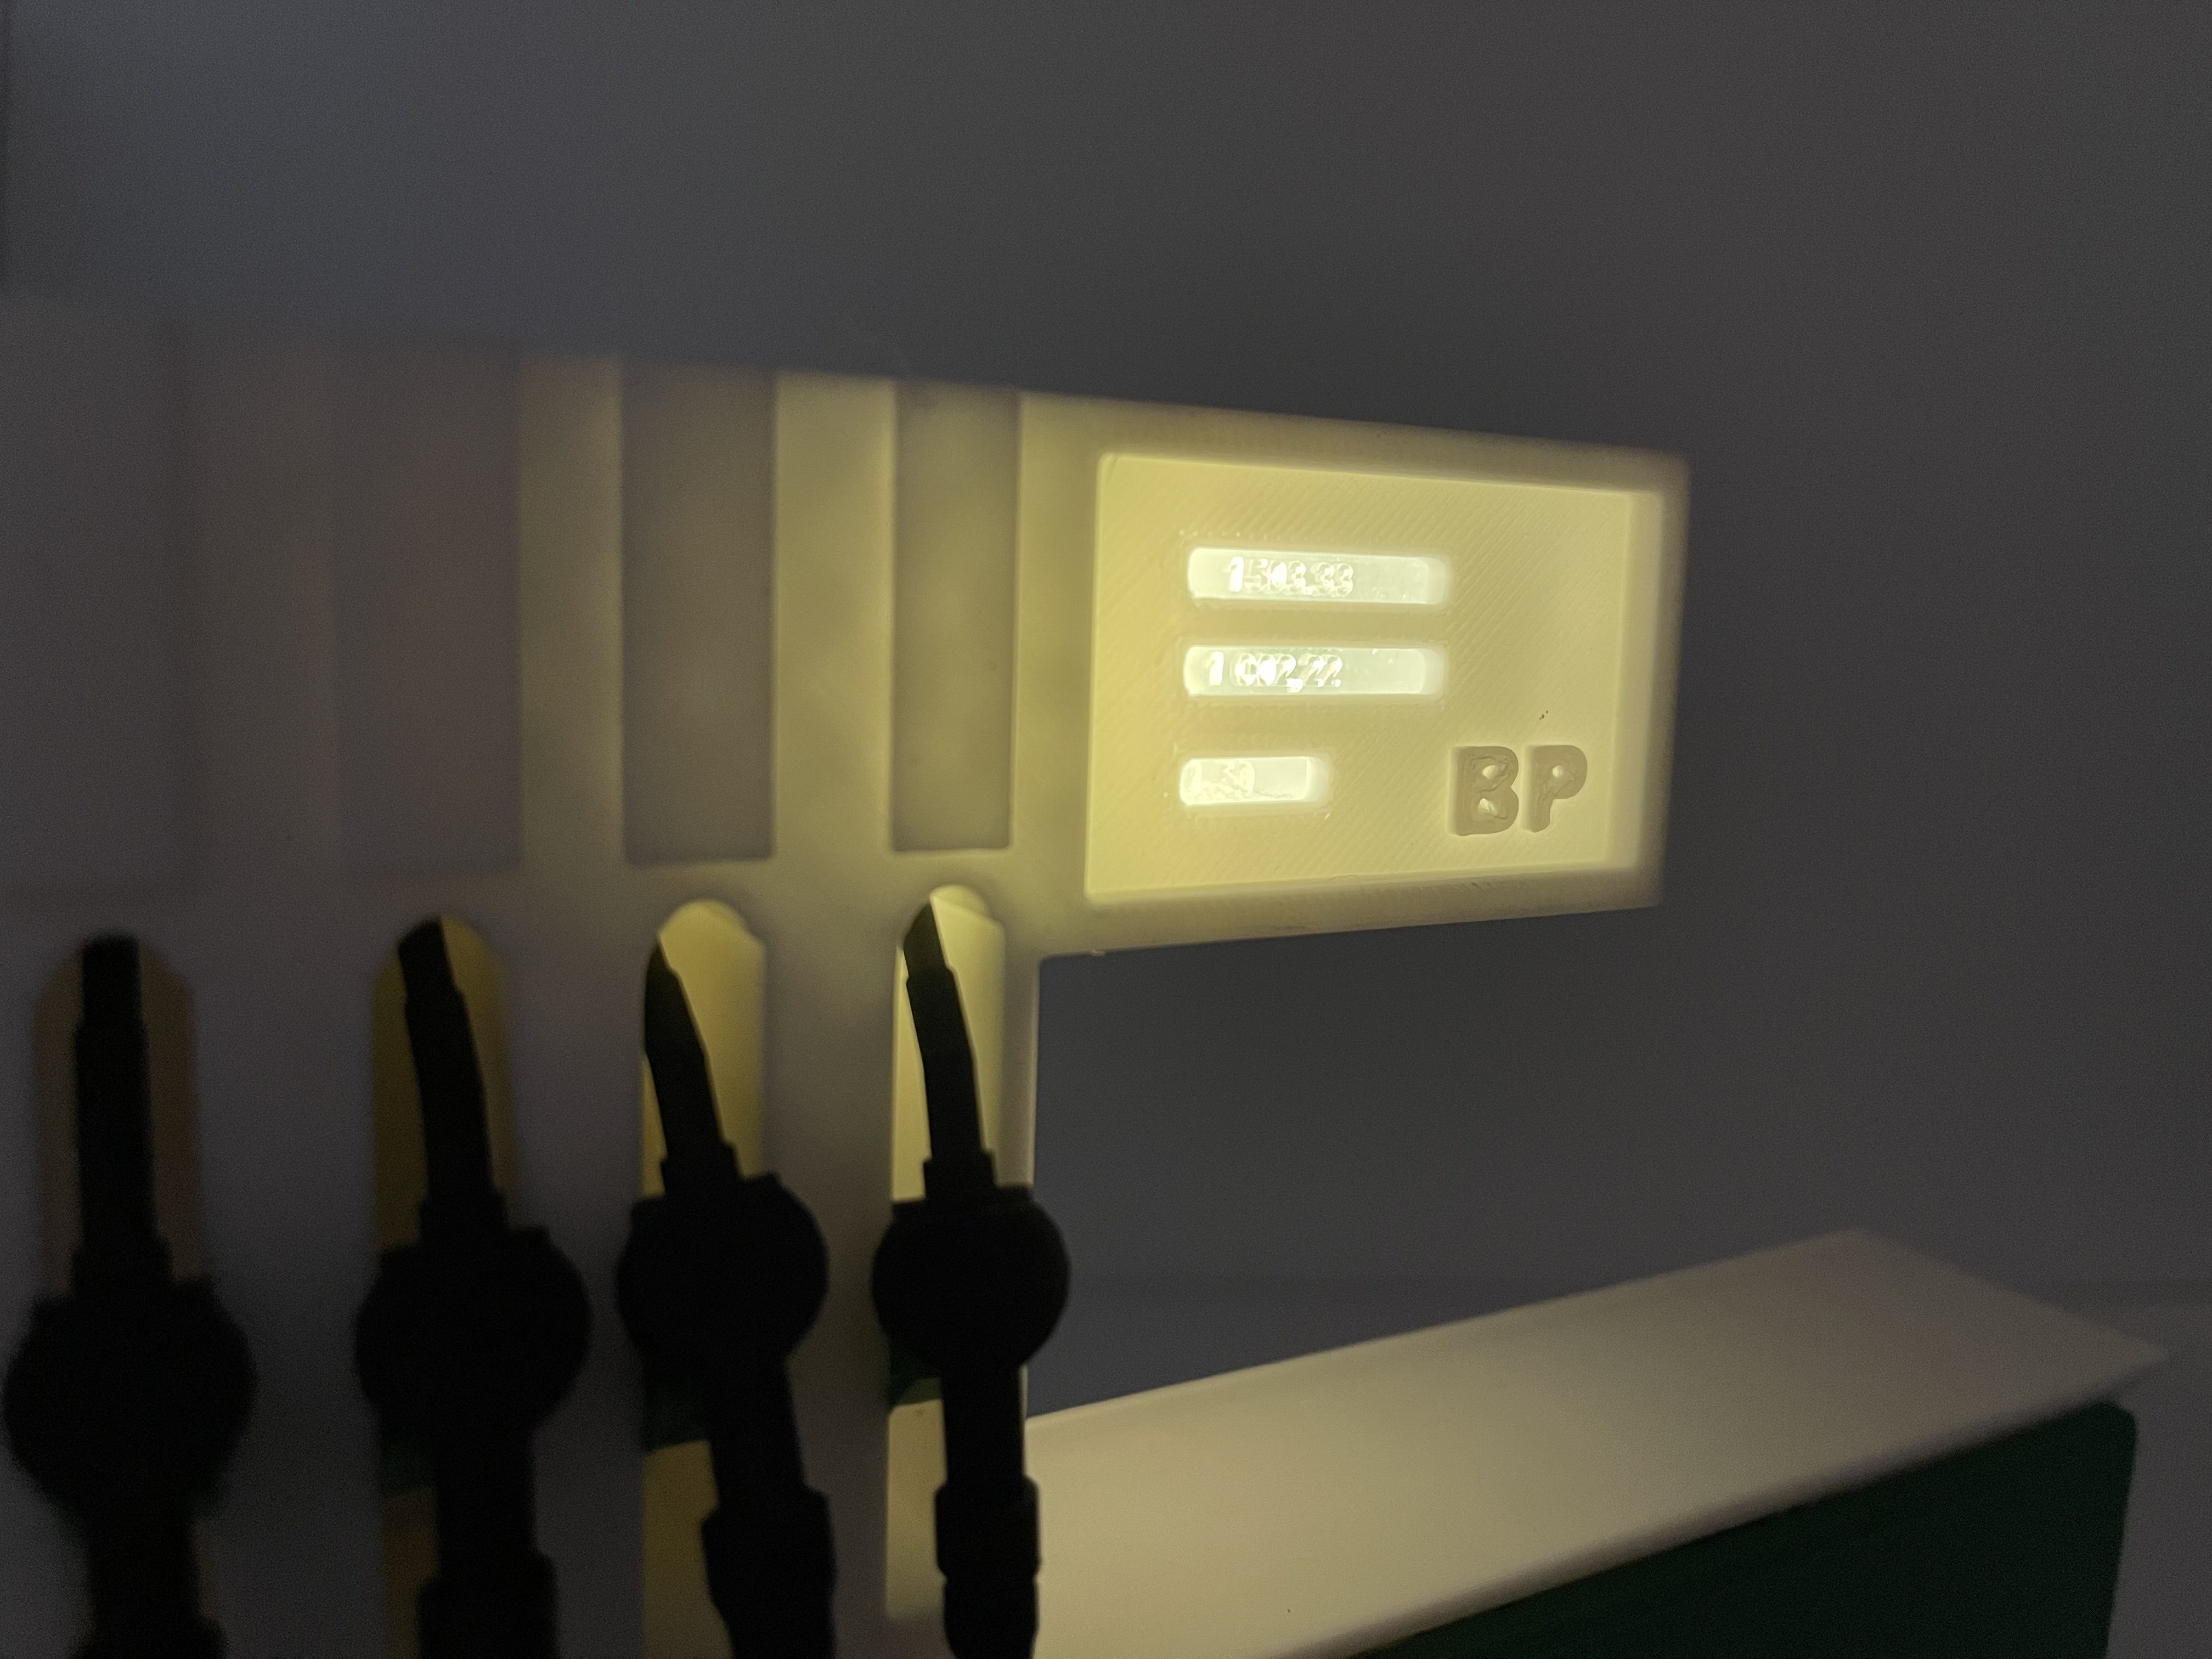 IMG-5253.jpg Download STL file SCALE GAS PUMP IN1/10 SCALE WITH LIGHT • 3D printing object, Darek3dprint